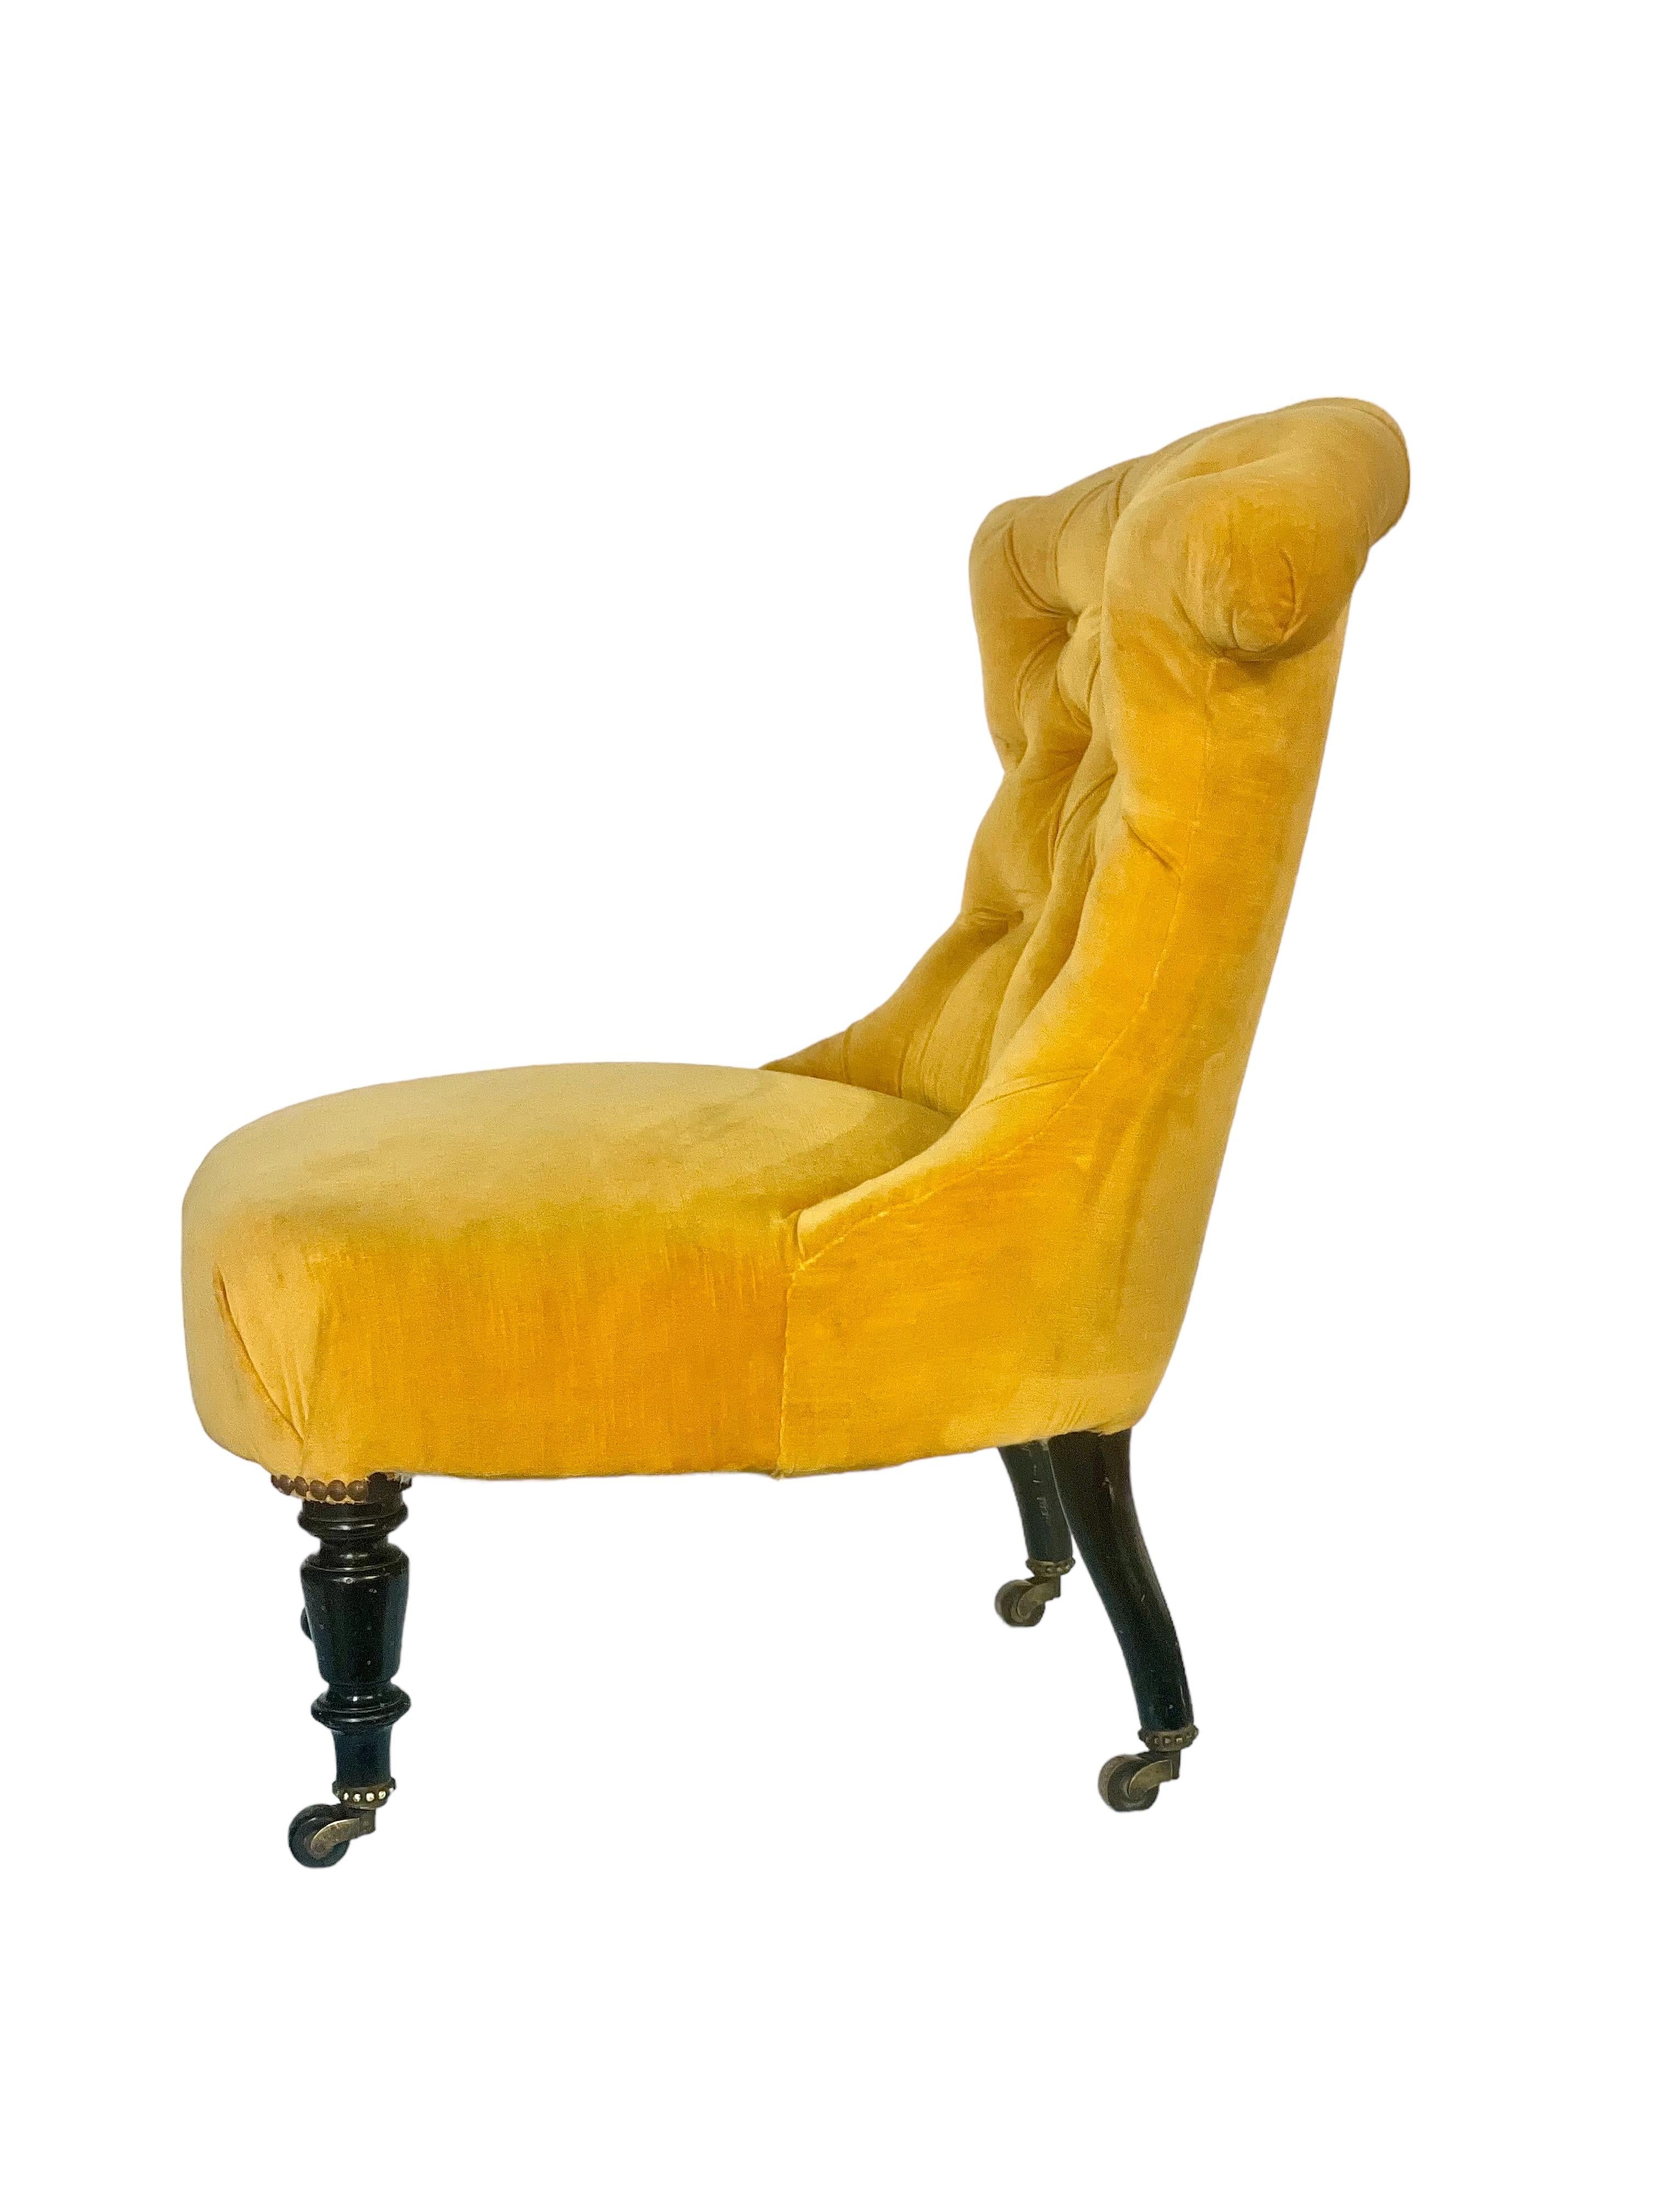 A pretty Napoleon III fireside slipper chair, with deep-buttoned back rest, luxurious yellow velvet upholstery and a plush sprung seat. Dating from around 1860-80, this gorgeous and very comfortable chair has its beautiful original ebonised turned